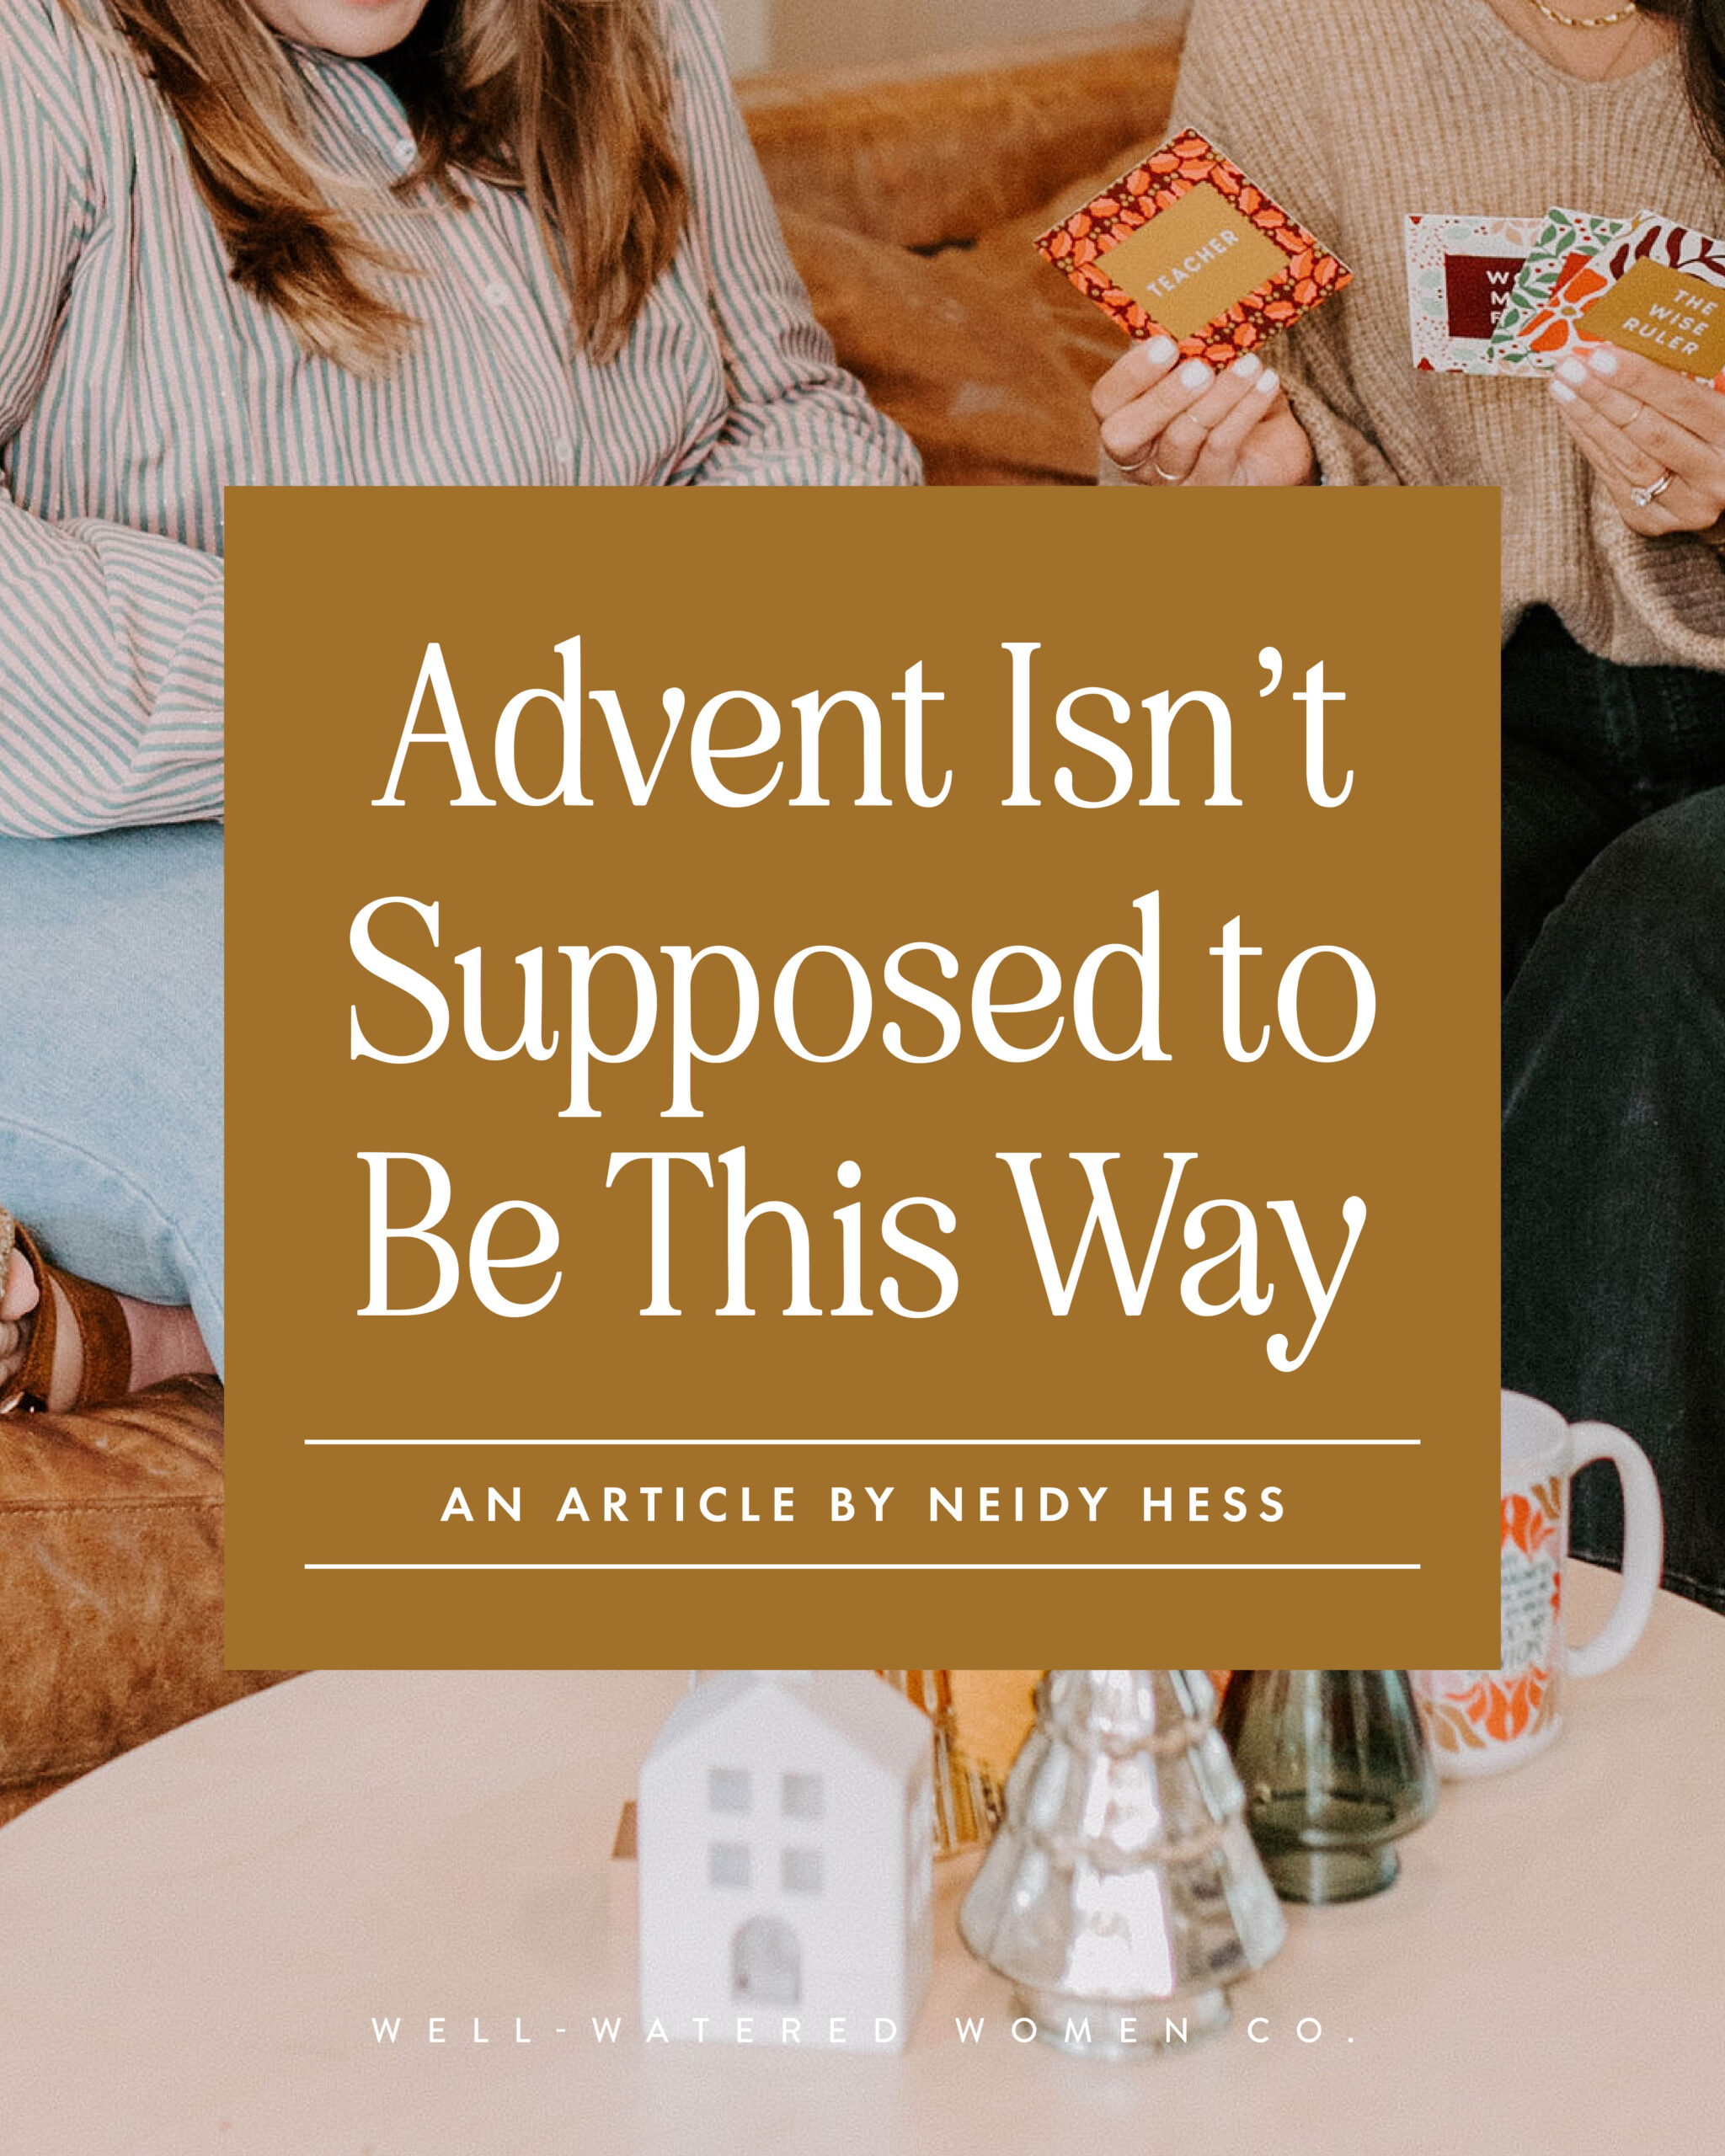 Advent Isn't Supposed to Be This Way - an article from Well-Watered Women